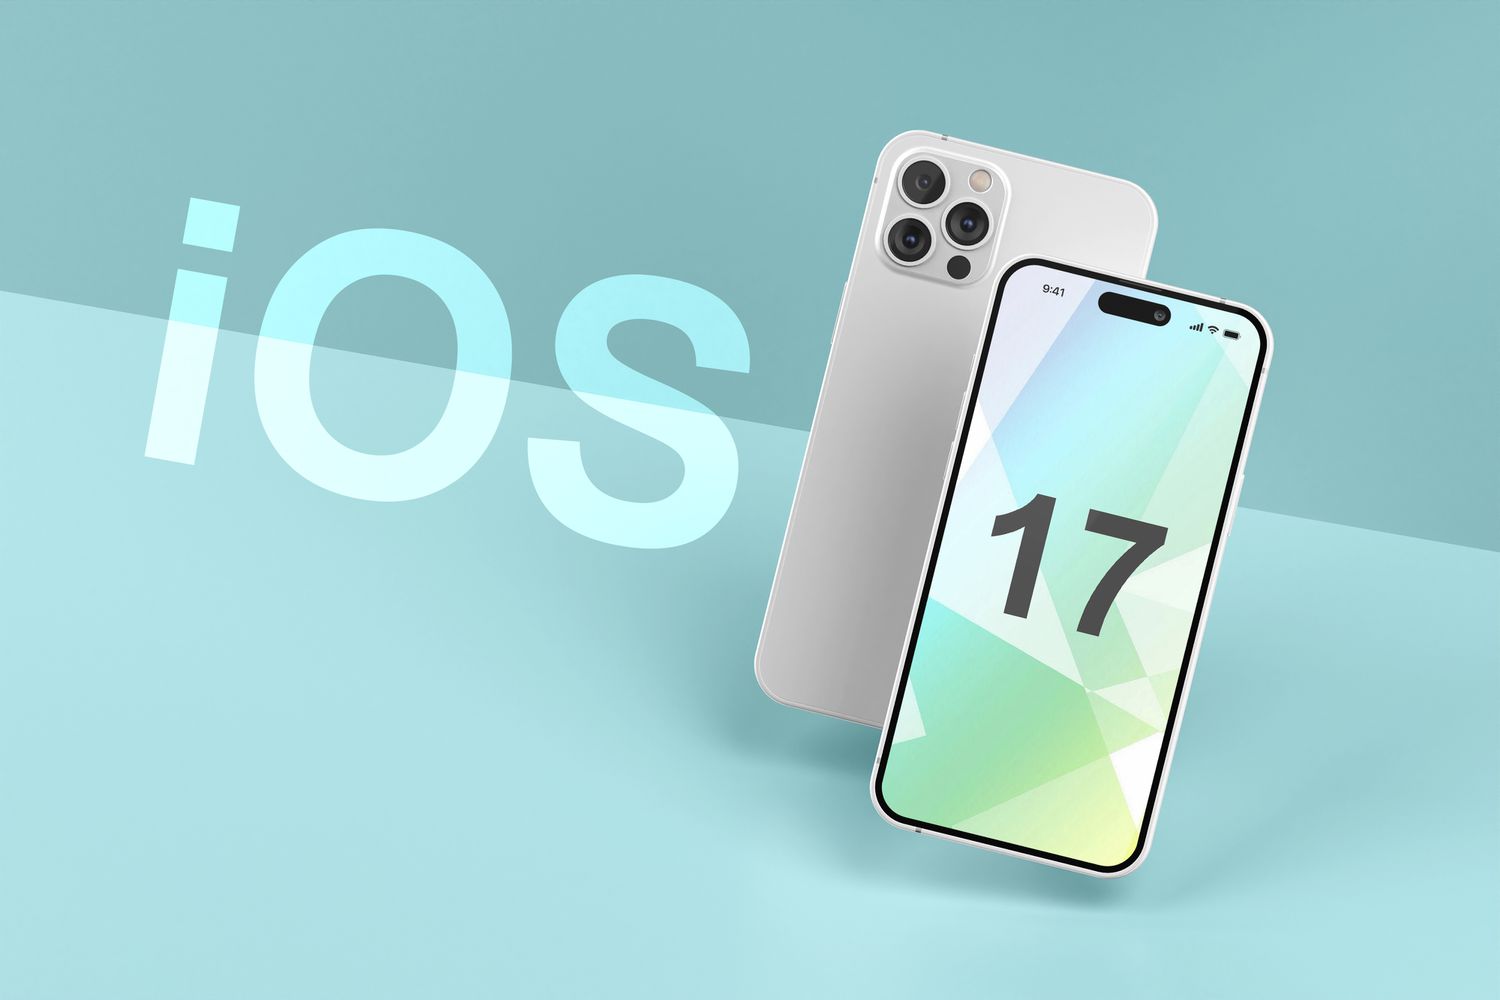 Apple iOS 17: all the rumours about the next iPhone software update